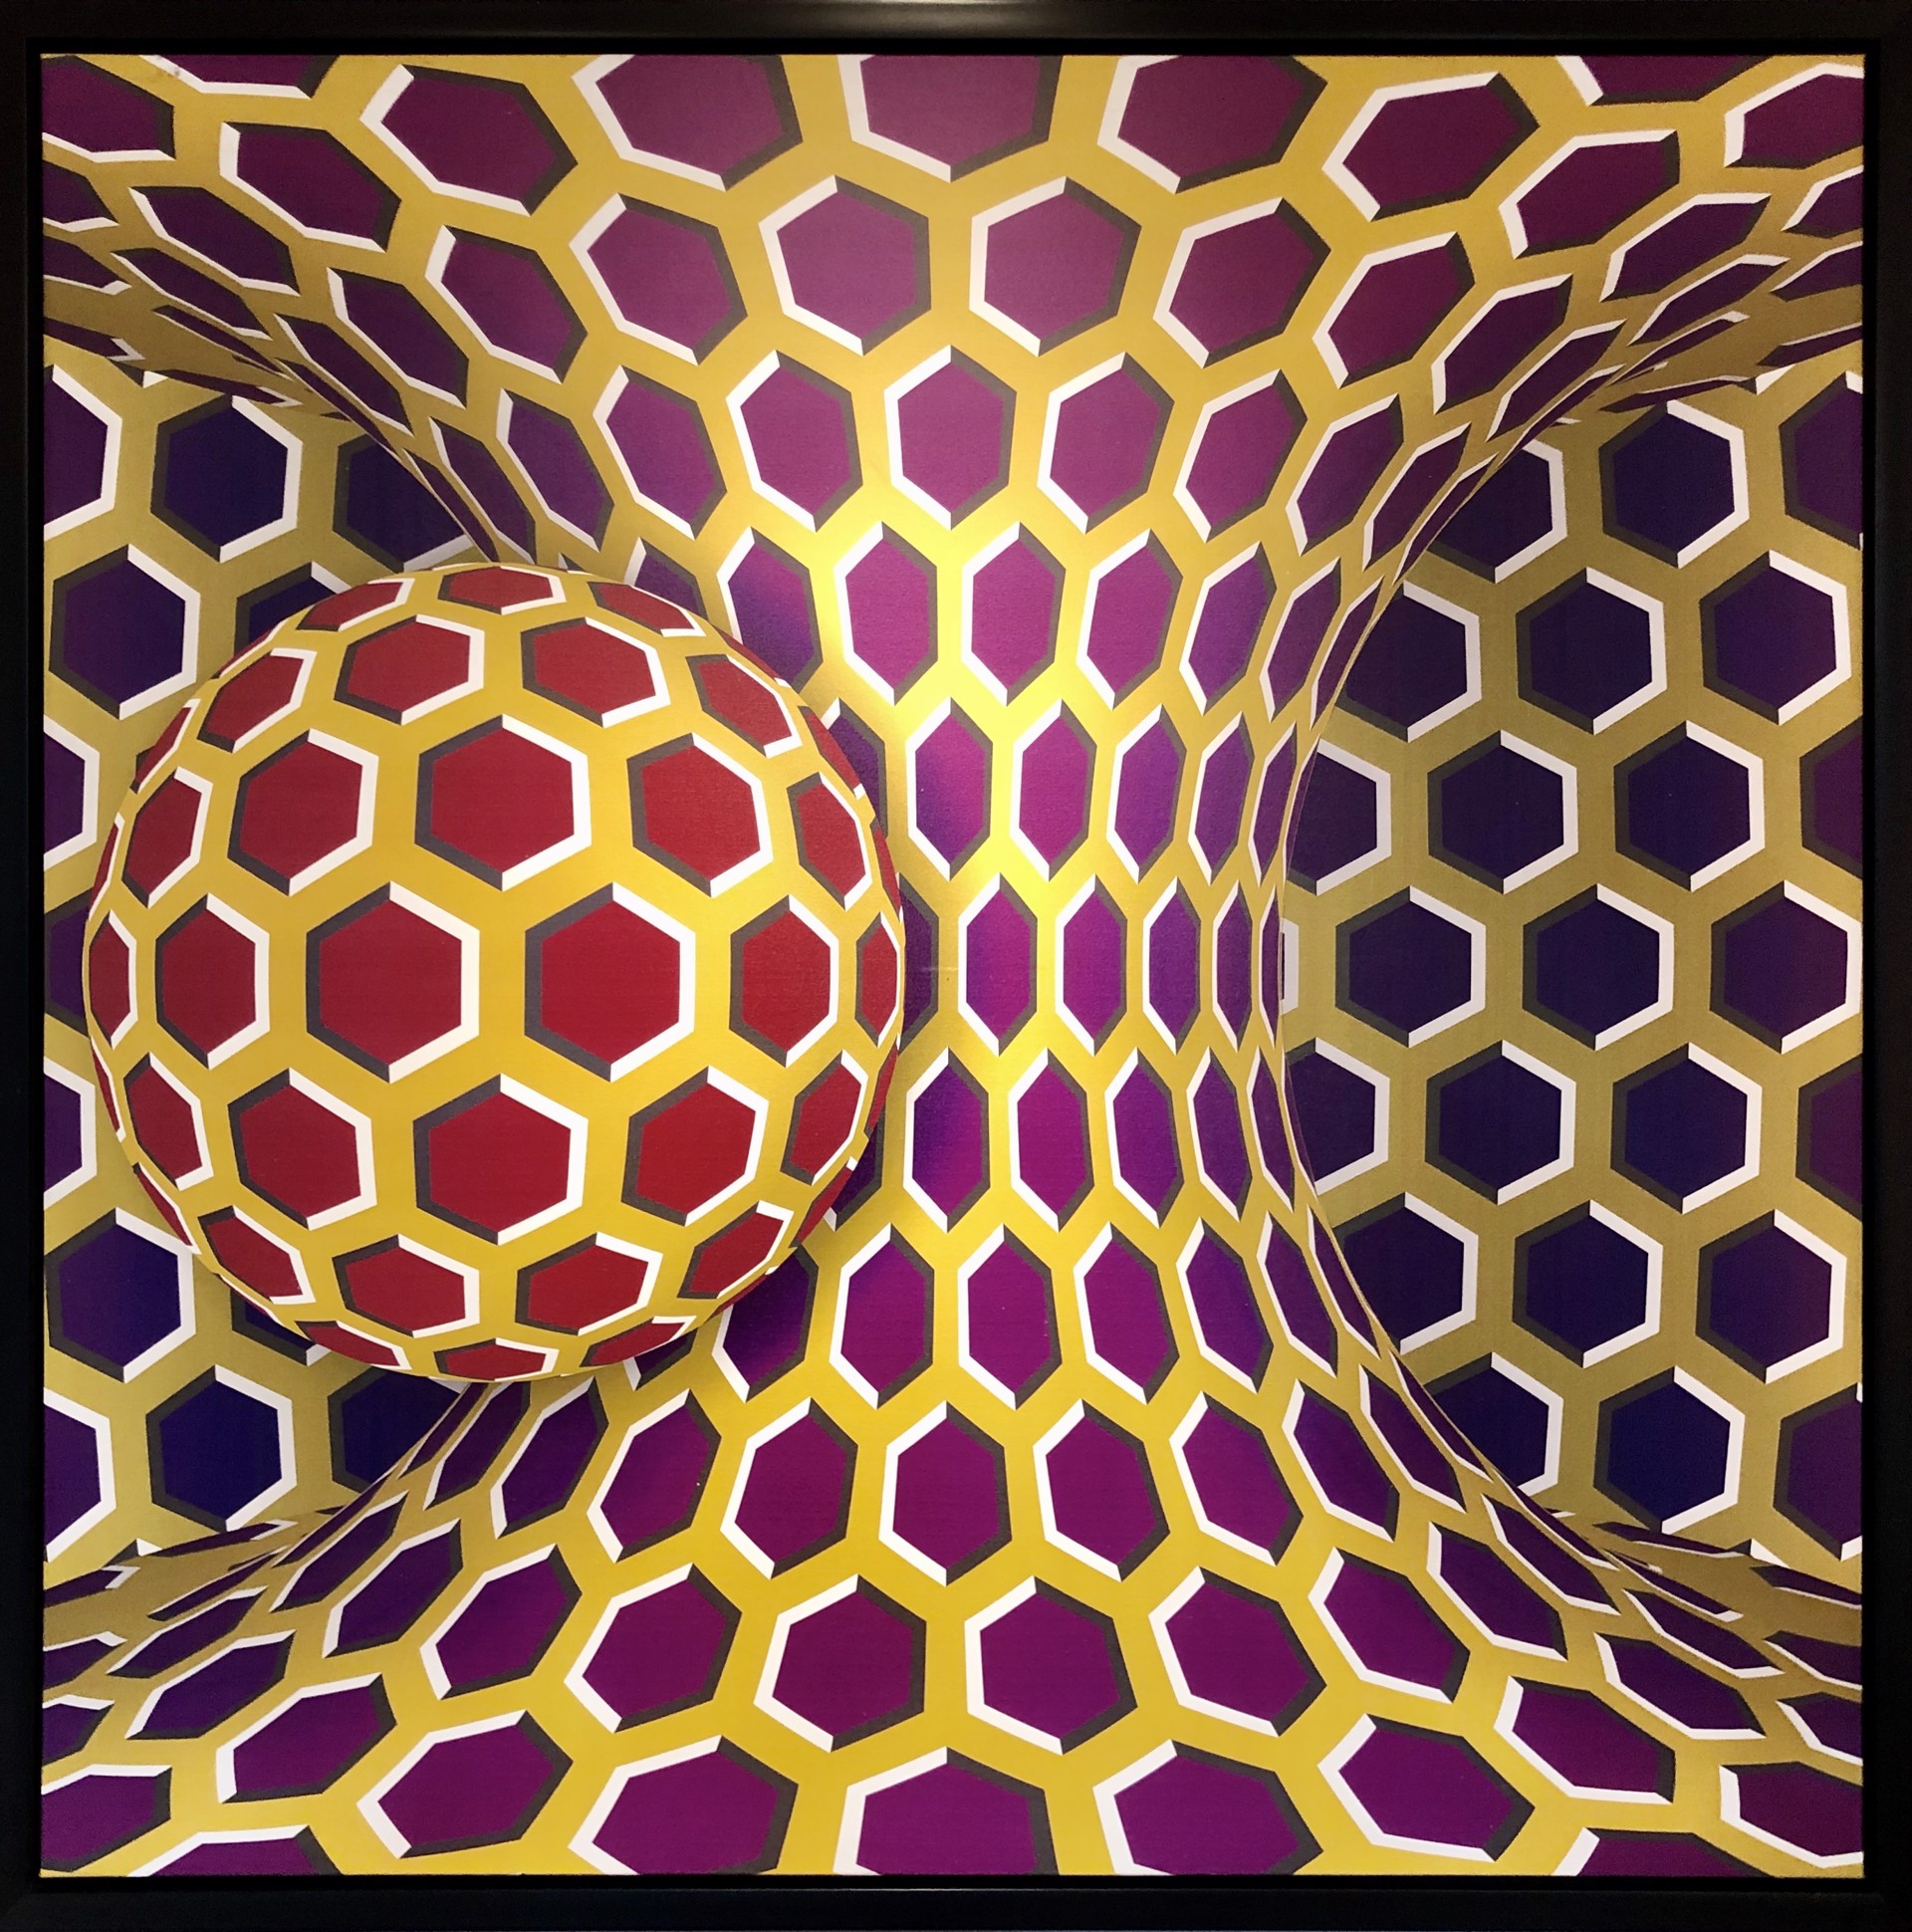 "Purple Bee Optical Illusion" by BuMa Project